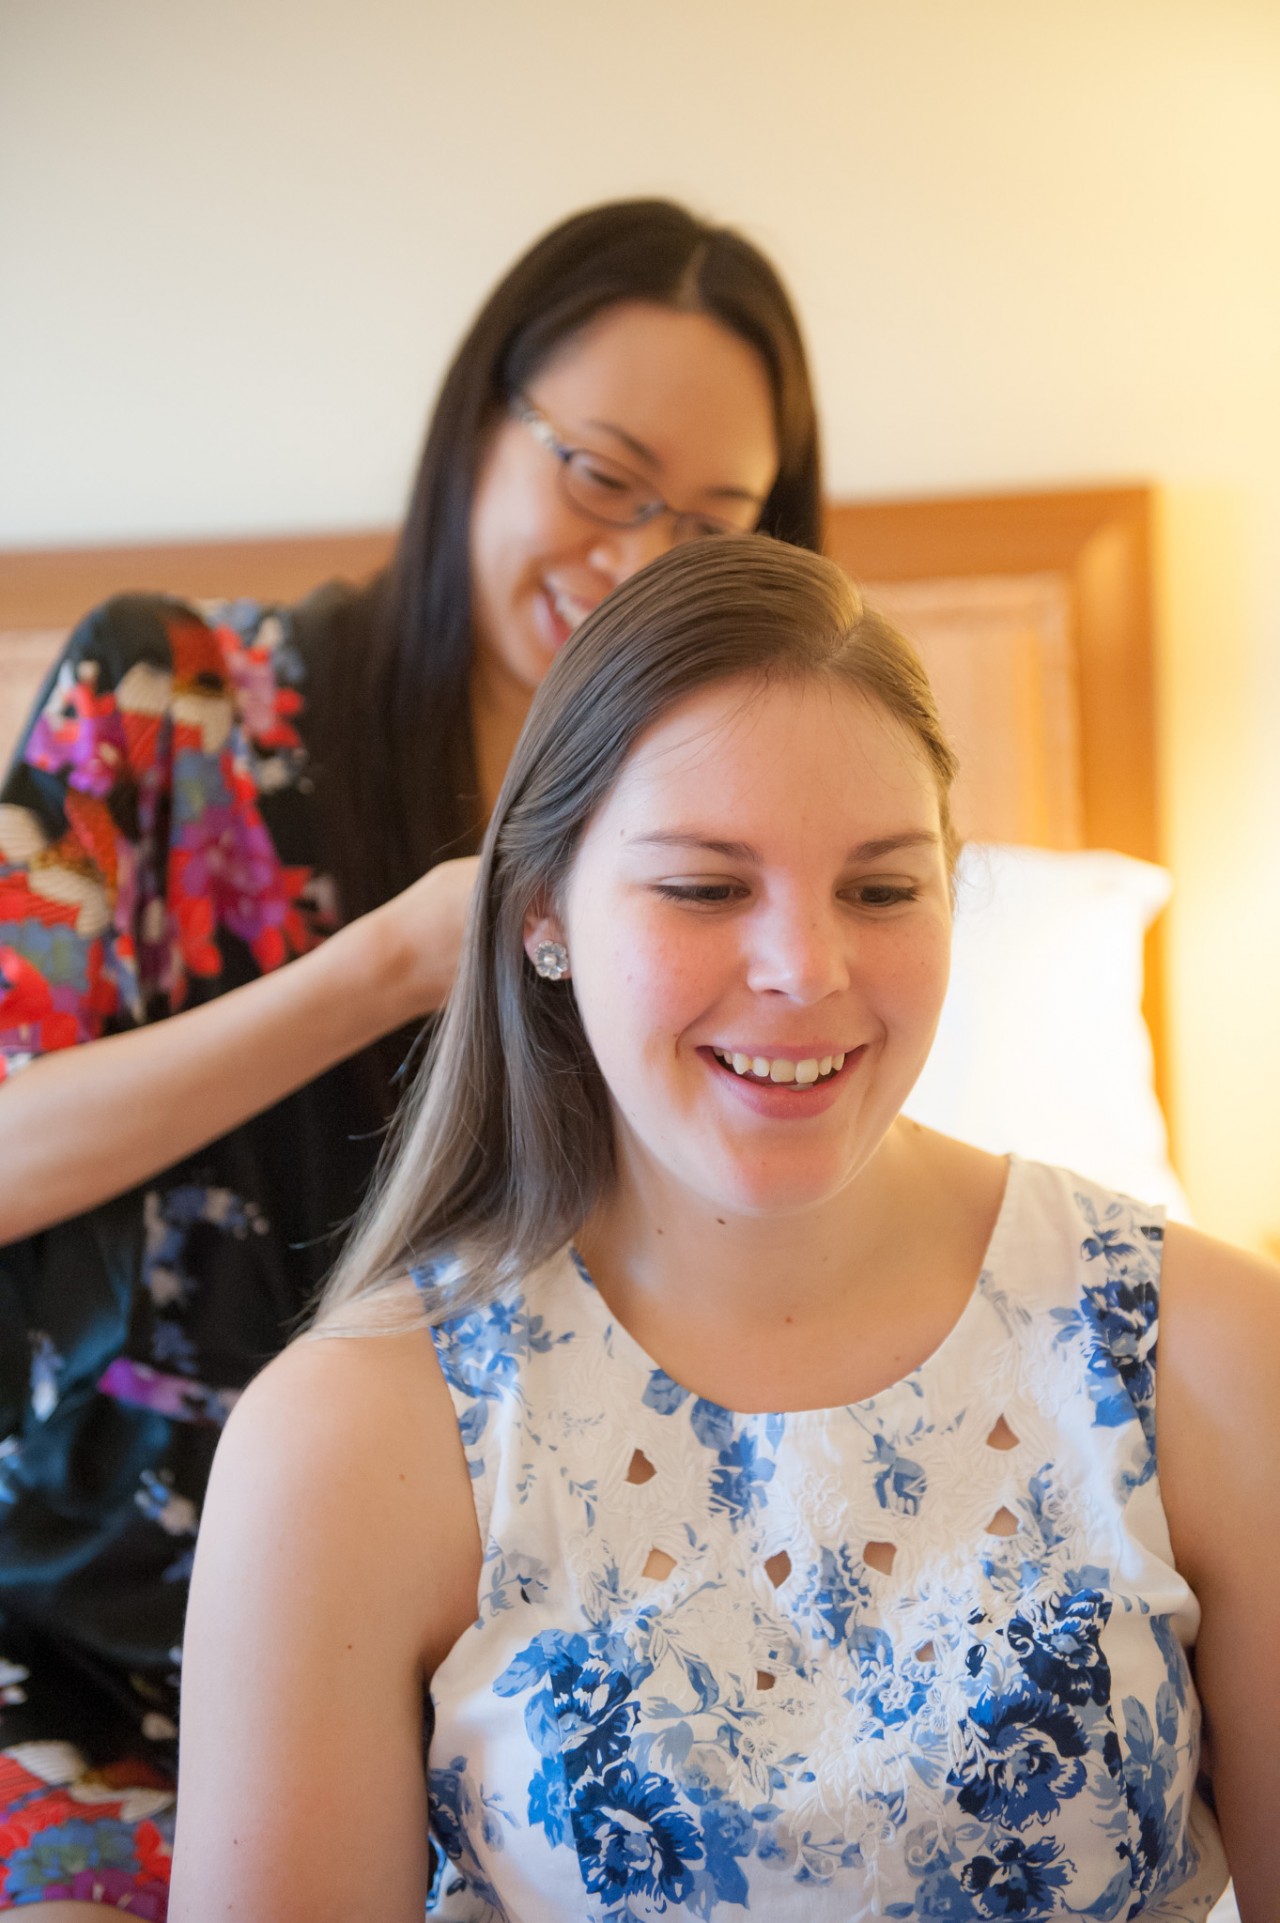 Tish helping out with Marion's hair at the Marriott Brisbane